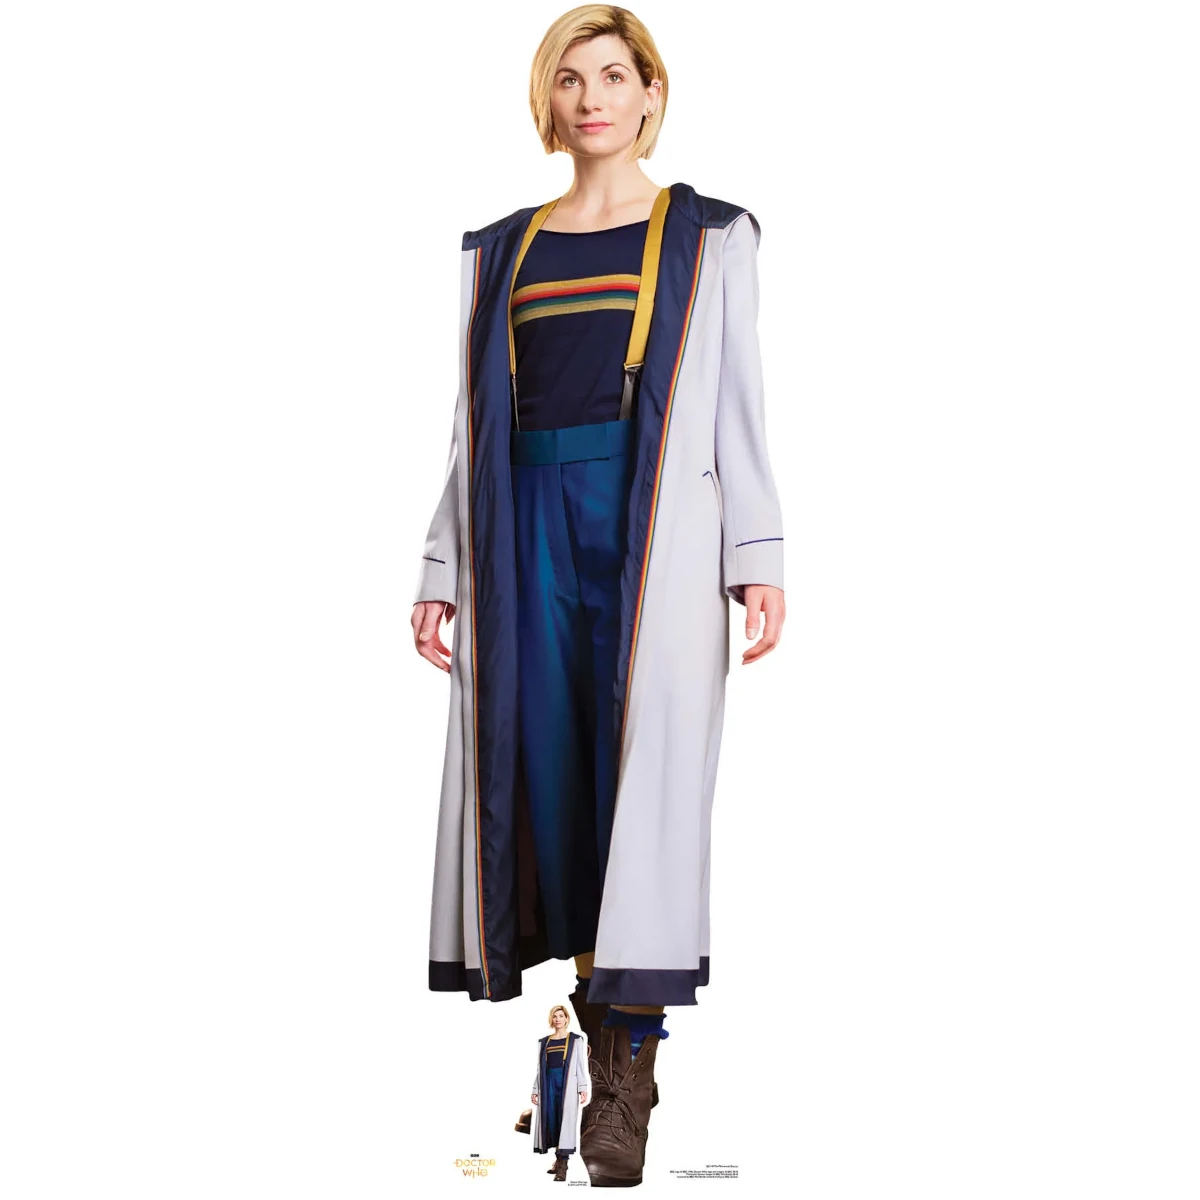 SC1197 Thirteenth Doctor 'Jodie Whittaker' (Doctor Who) Official Lifesize + Mini Cardboard Cutout Standee Front